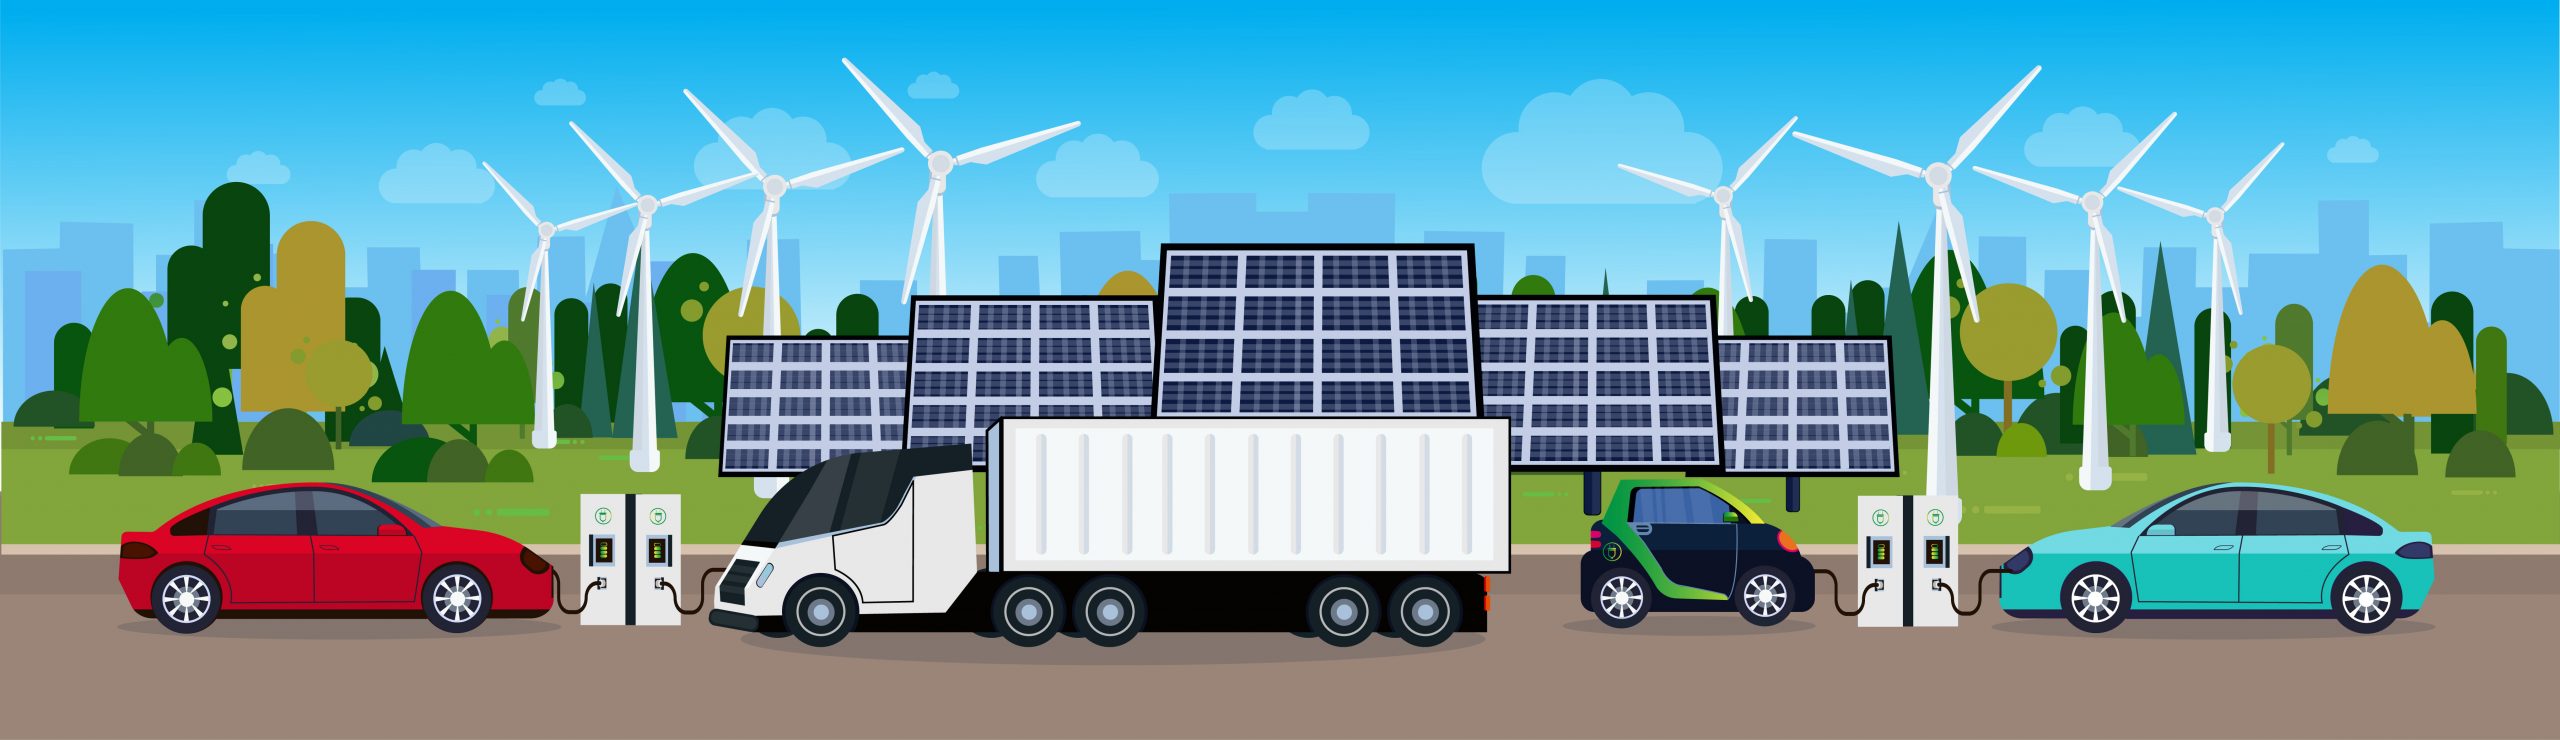 Collaboration between transport and renewable energy sectors is vital, says new report